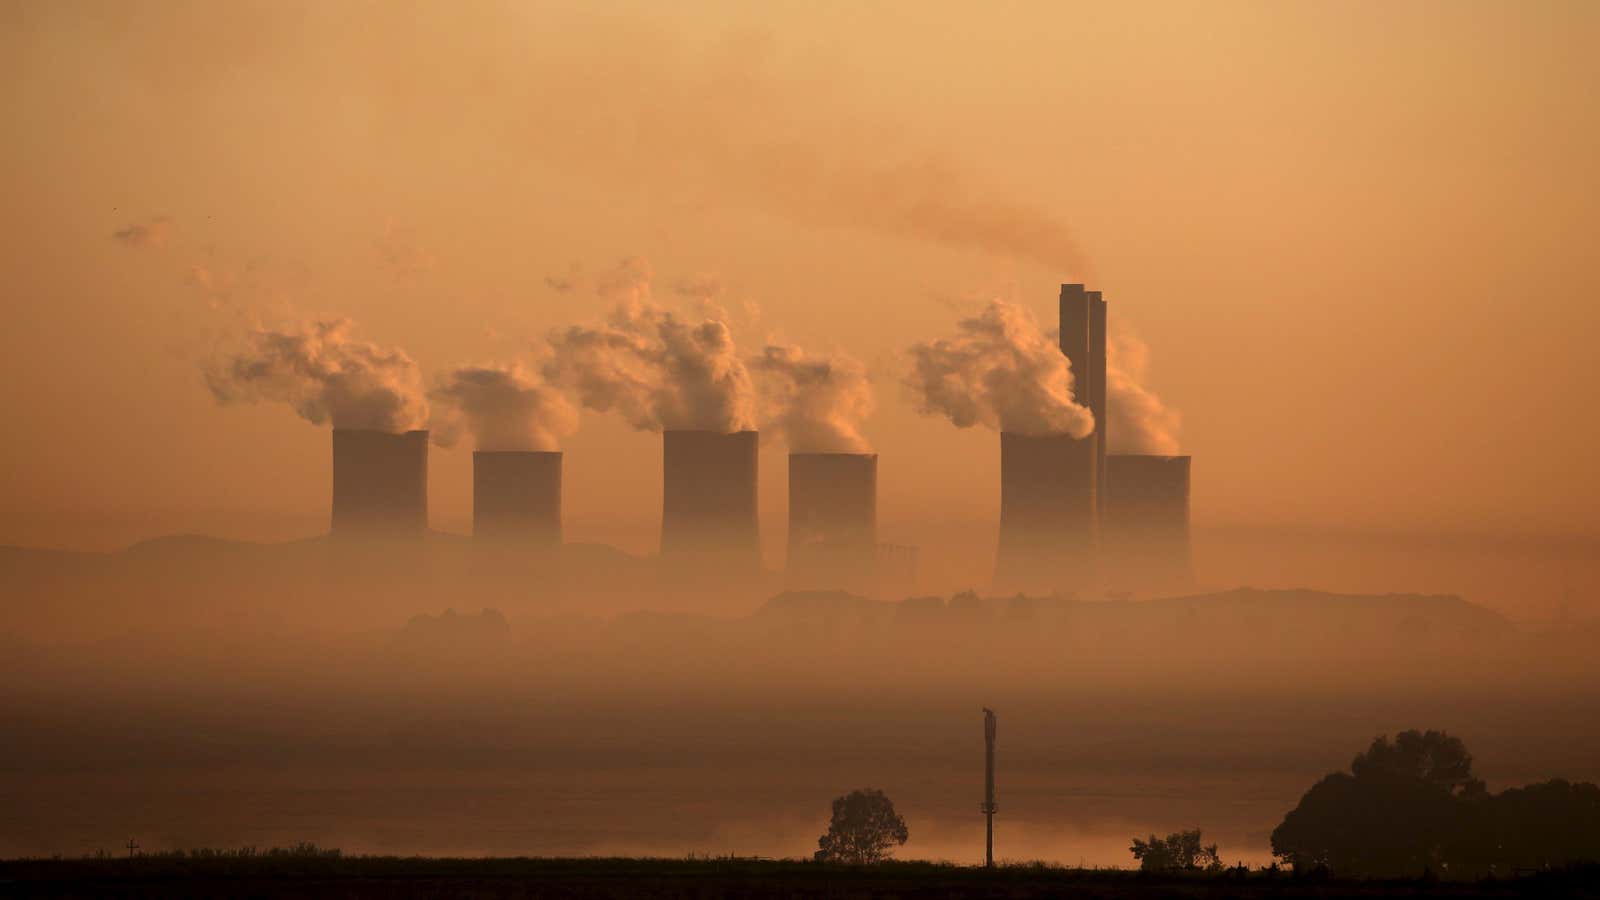 Steam rises at sunrise from the  Lethabo Power Station, a coal-fired power station owned by state power utility Eskom near Sasolburg, South Africa,